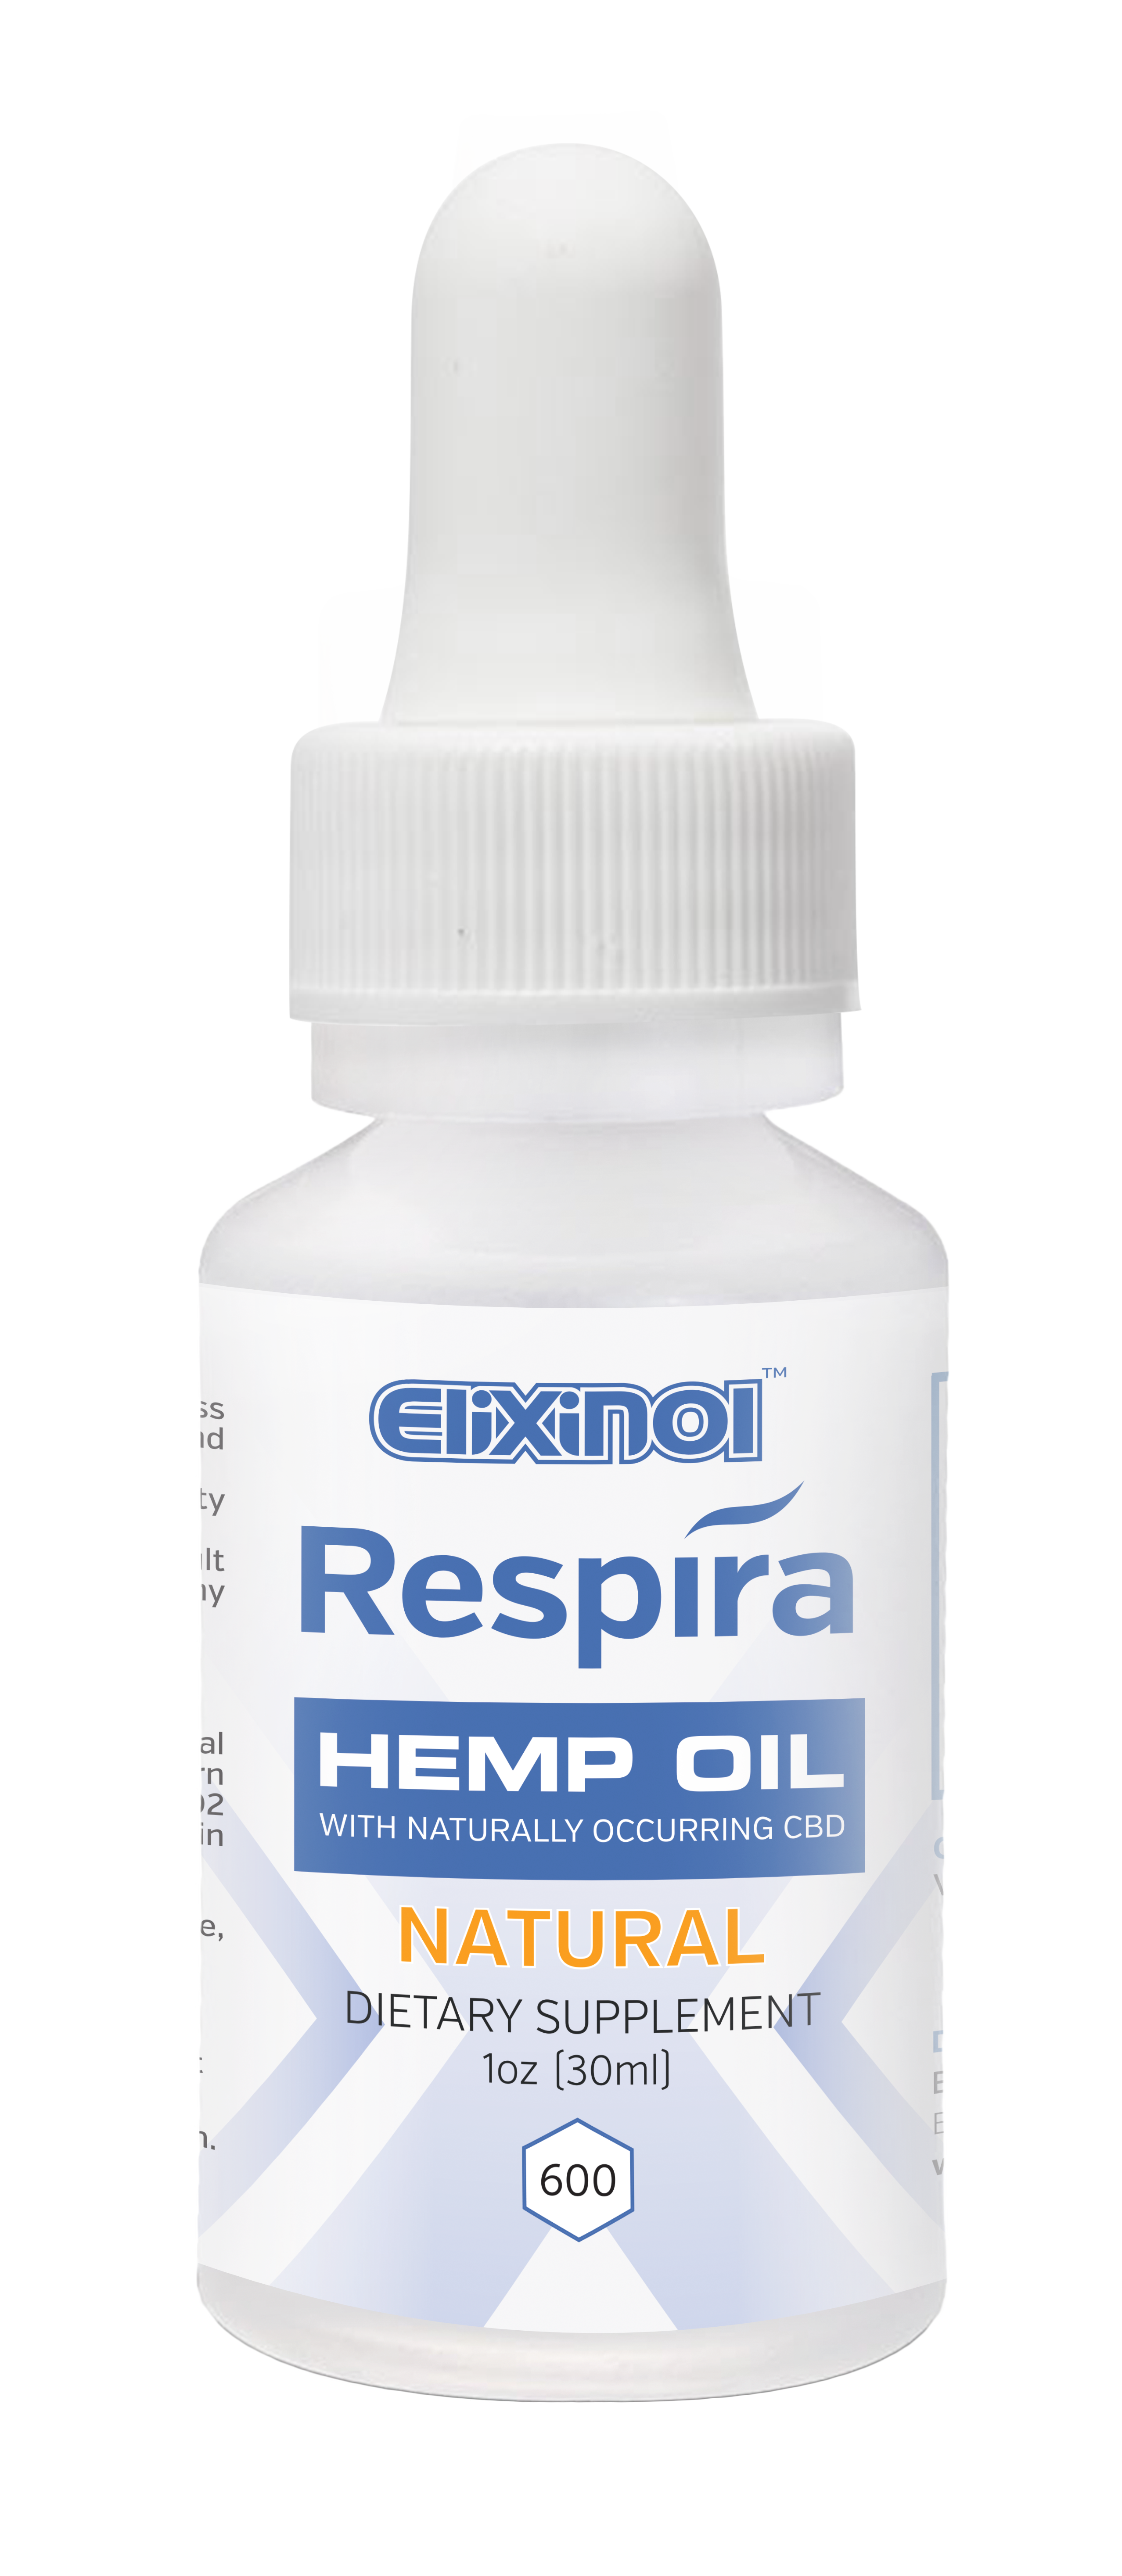 Respira CBD oil for oral, topical or vape use by Elixinol. 600mg, Natural Flavor